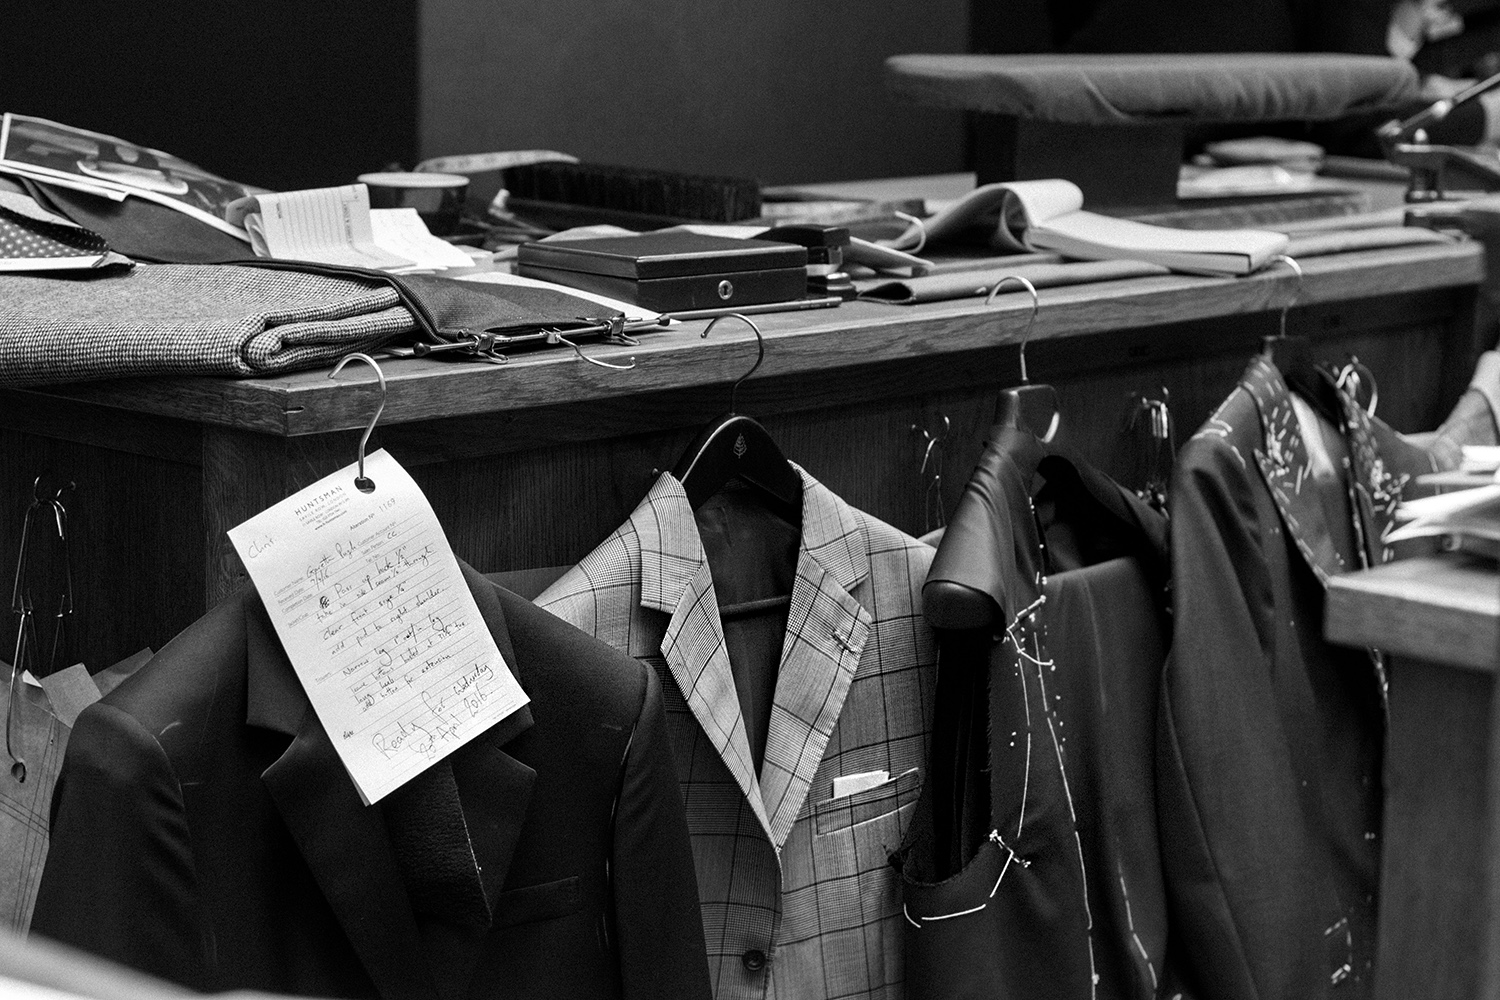 Huntsman on Savile Row / Inside Savile Row, London's well-known area for traditional bespoke tailoring for men – Travel, Lifestyle & Fashionblog by Alice M. Huynh / iHeartAlice.com